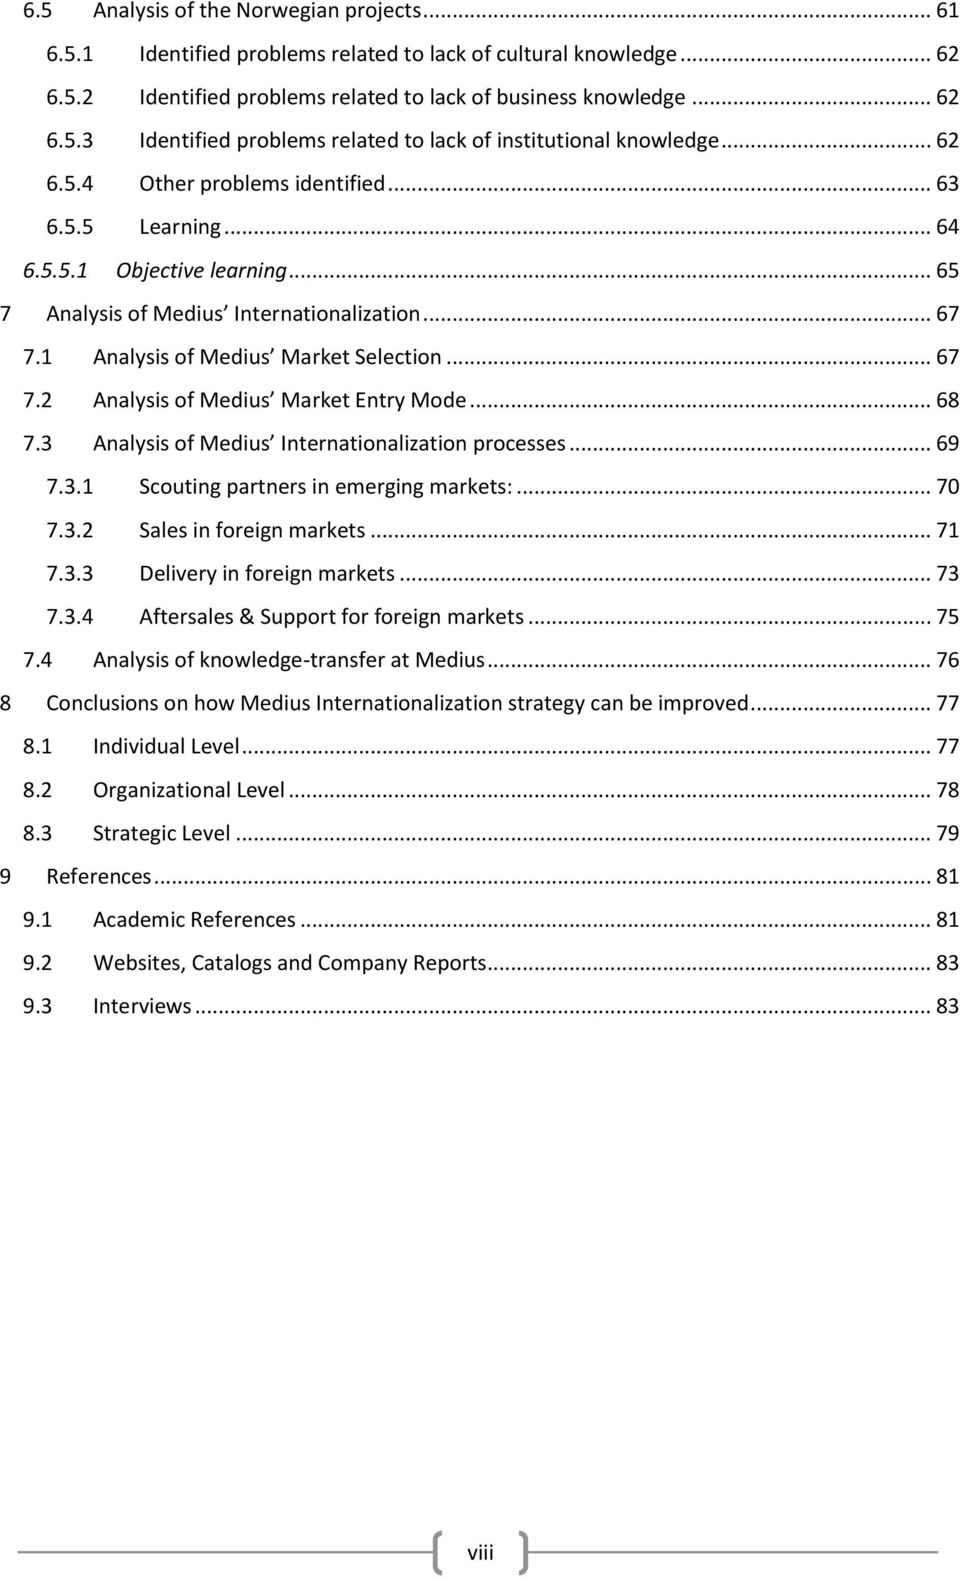 .. 68 7.3 Analysis of Medius Internationalization processes... 69 7.3.1 Scouting partners in emerging markets:... 70 7.3.2 Sales in foreign markets... 71 7.3.3 Delivery in foreign markets... 73 7.3.4 Aftersales & Support for foreign markets.